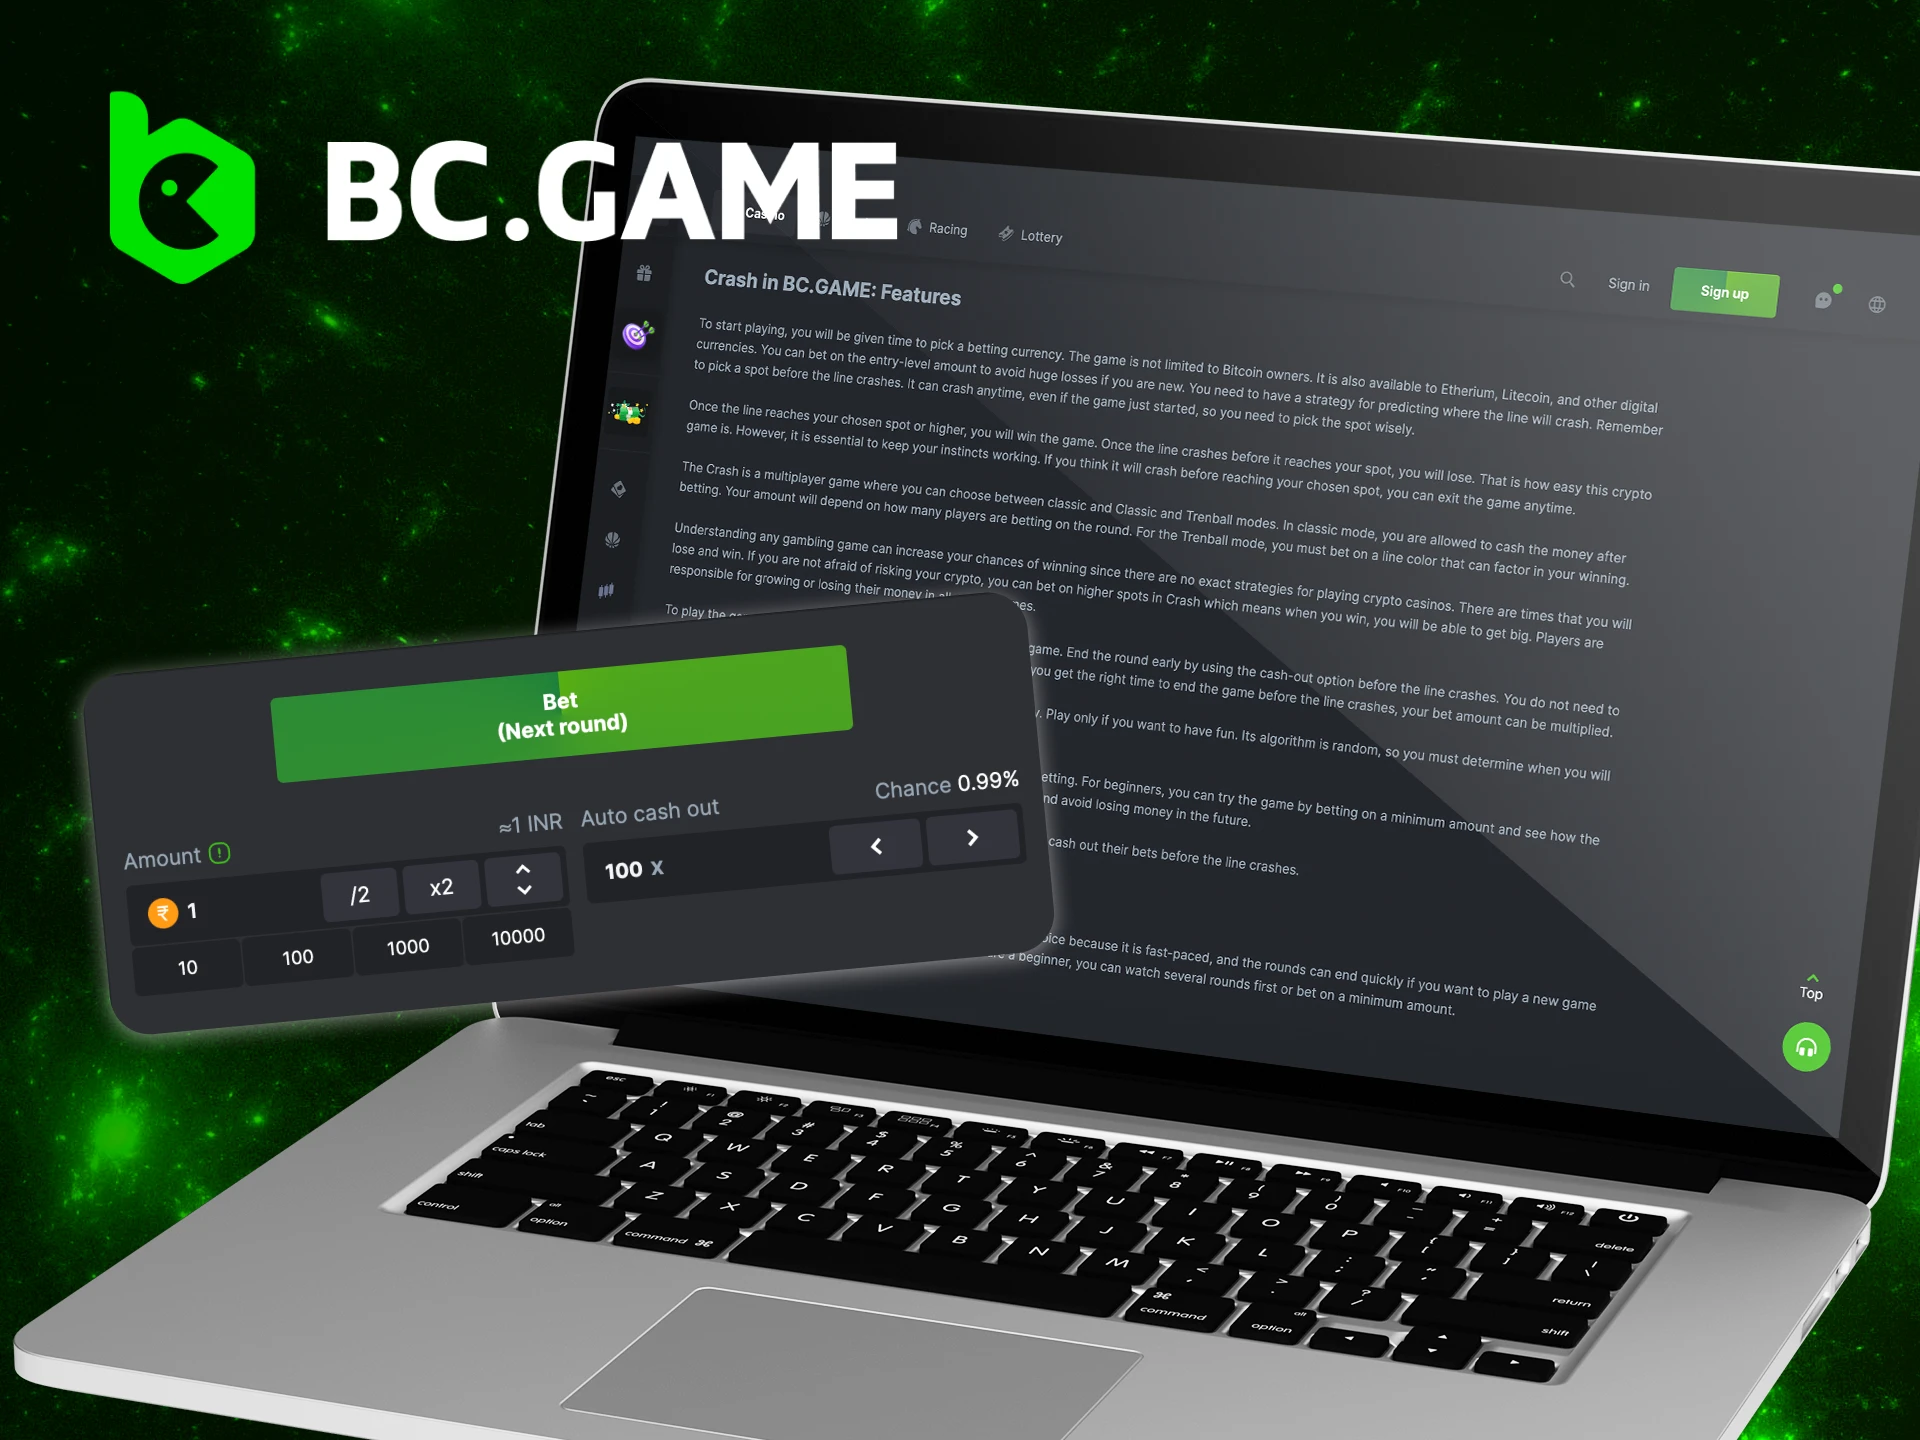 Instructions on how to start playing crash games on the BC Game casino website.